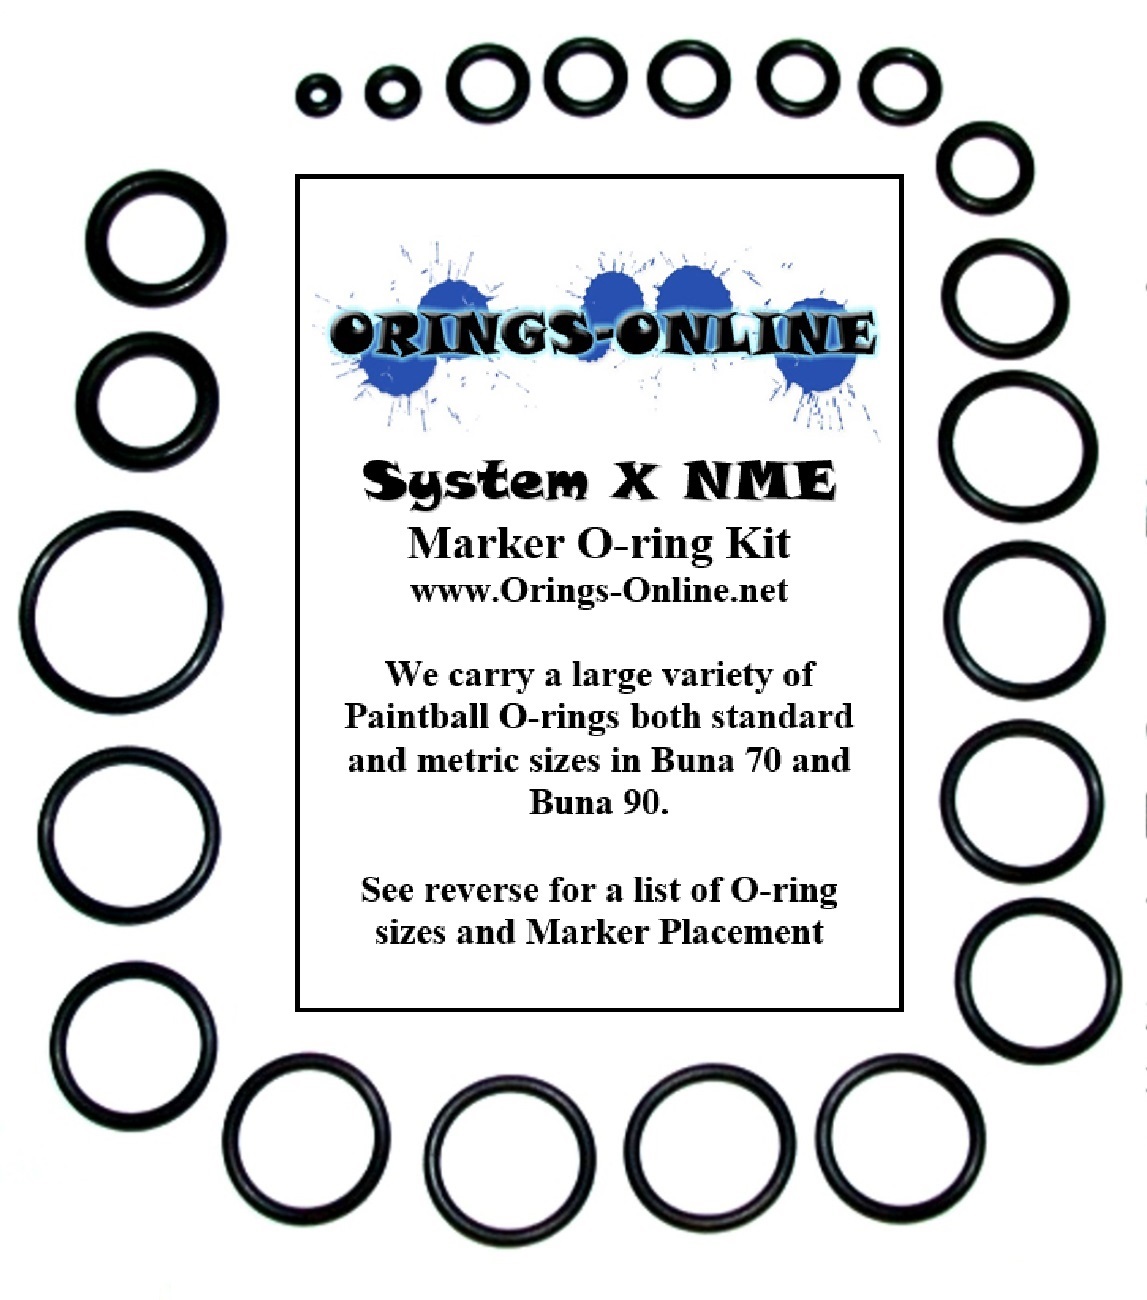 System X NME Marker O-ring Kit